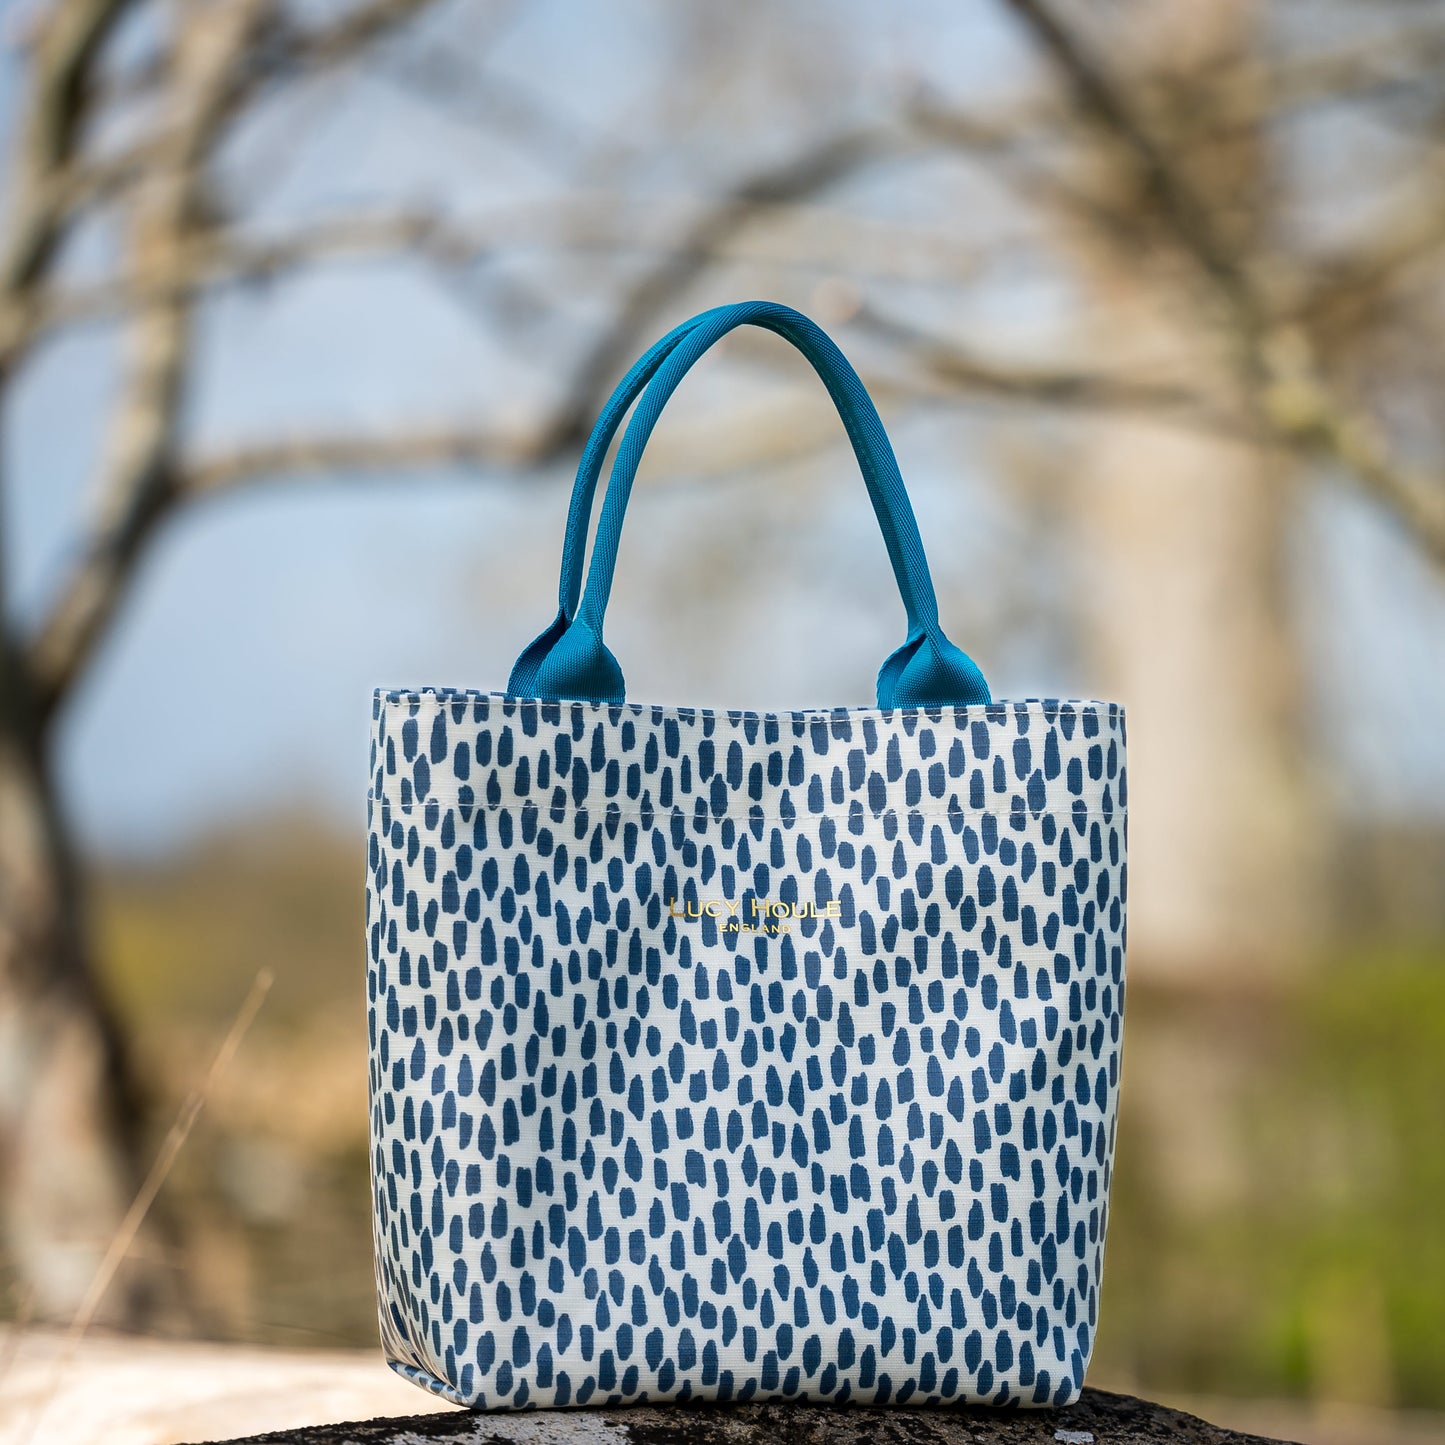 Navy Cobblestone Mini Tote Bag with Turquoise Handles